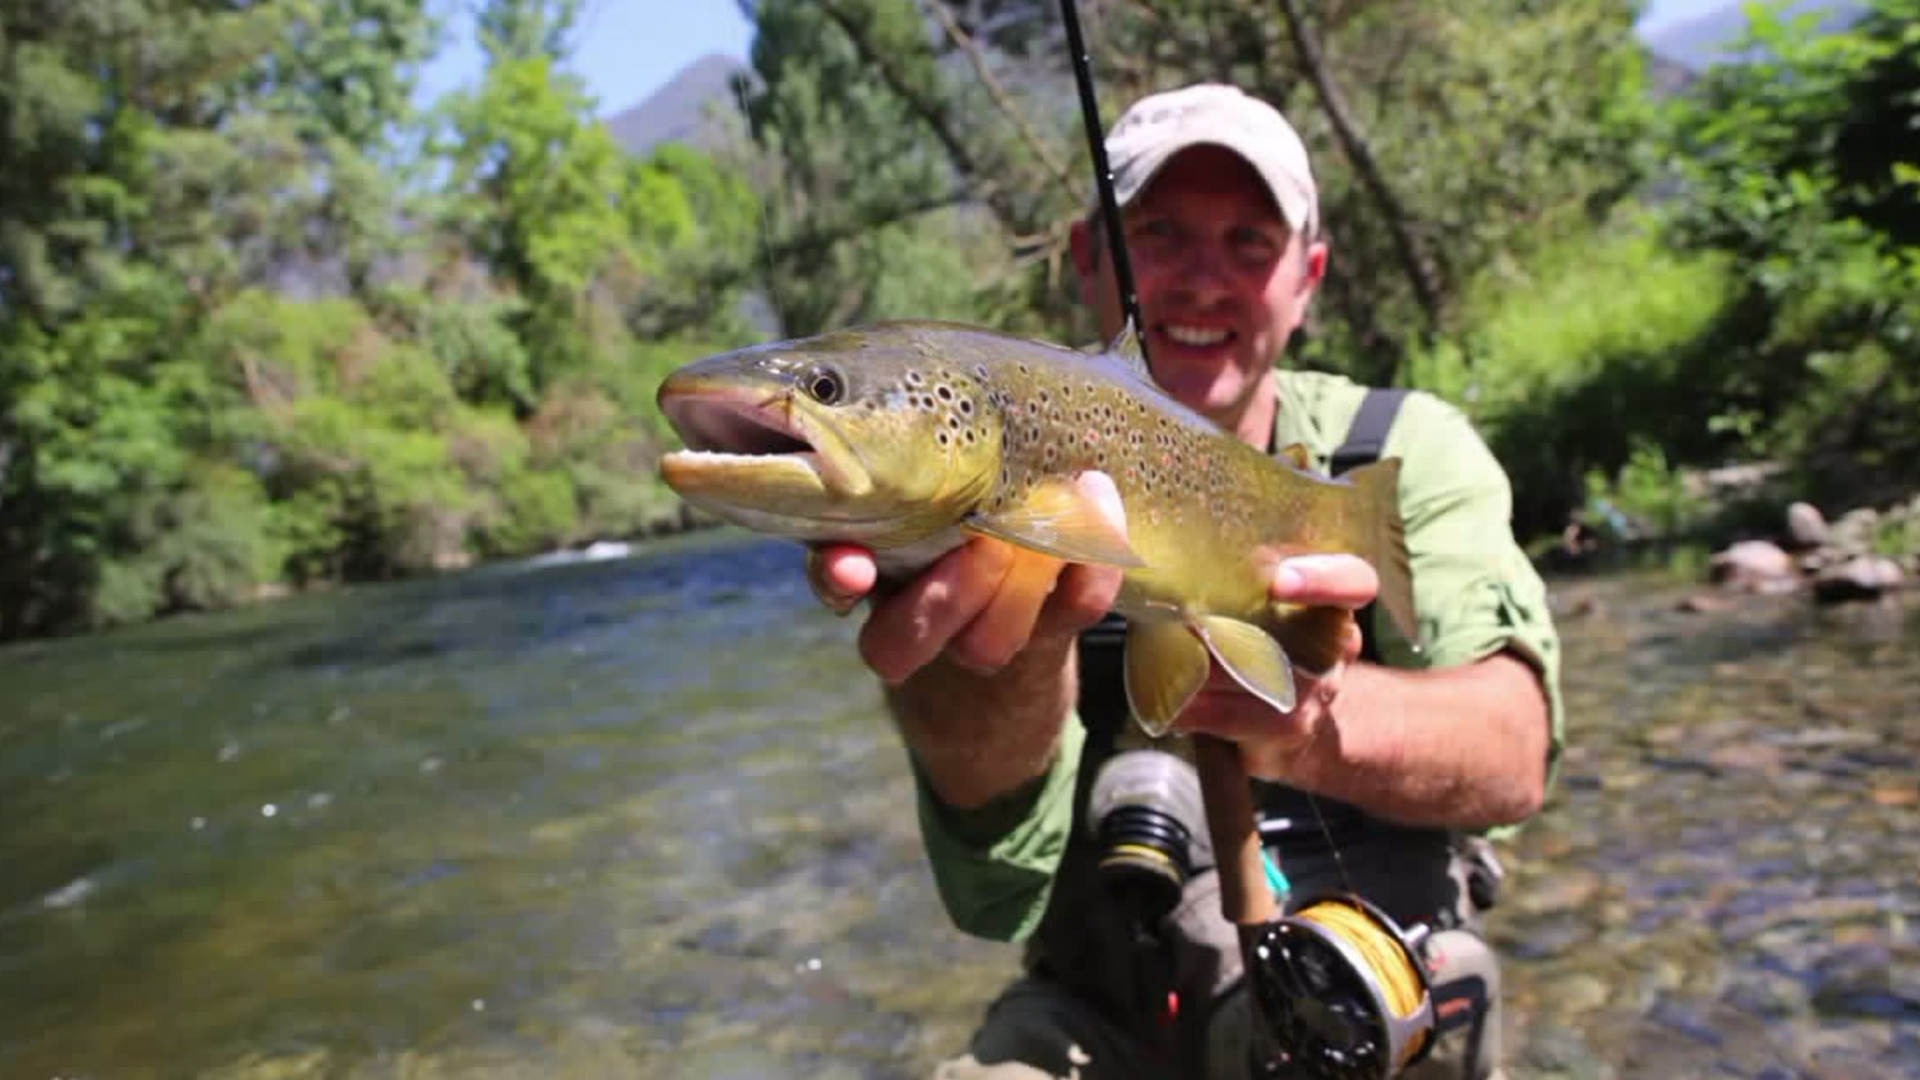 Allenberry Fly Fishing and Outdoor Festival